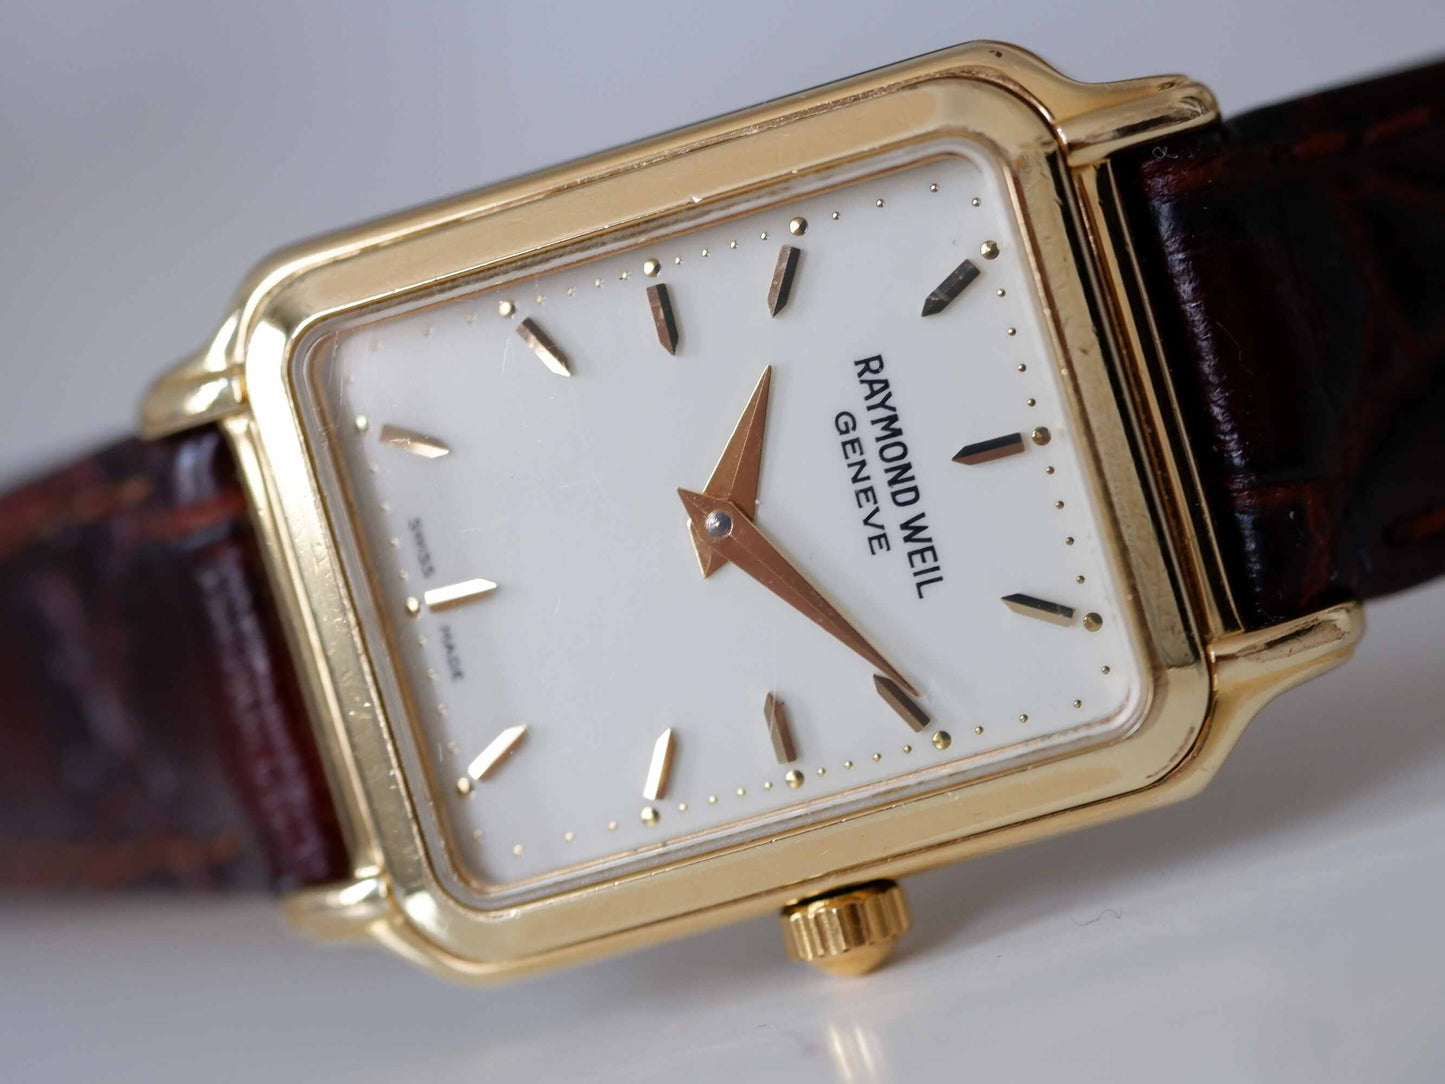 Raymond Weil Vintage Ladies Watch: 90s Golden Rectangular Style with White Dial | Second Front Side